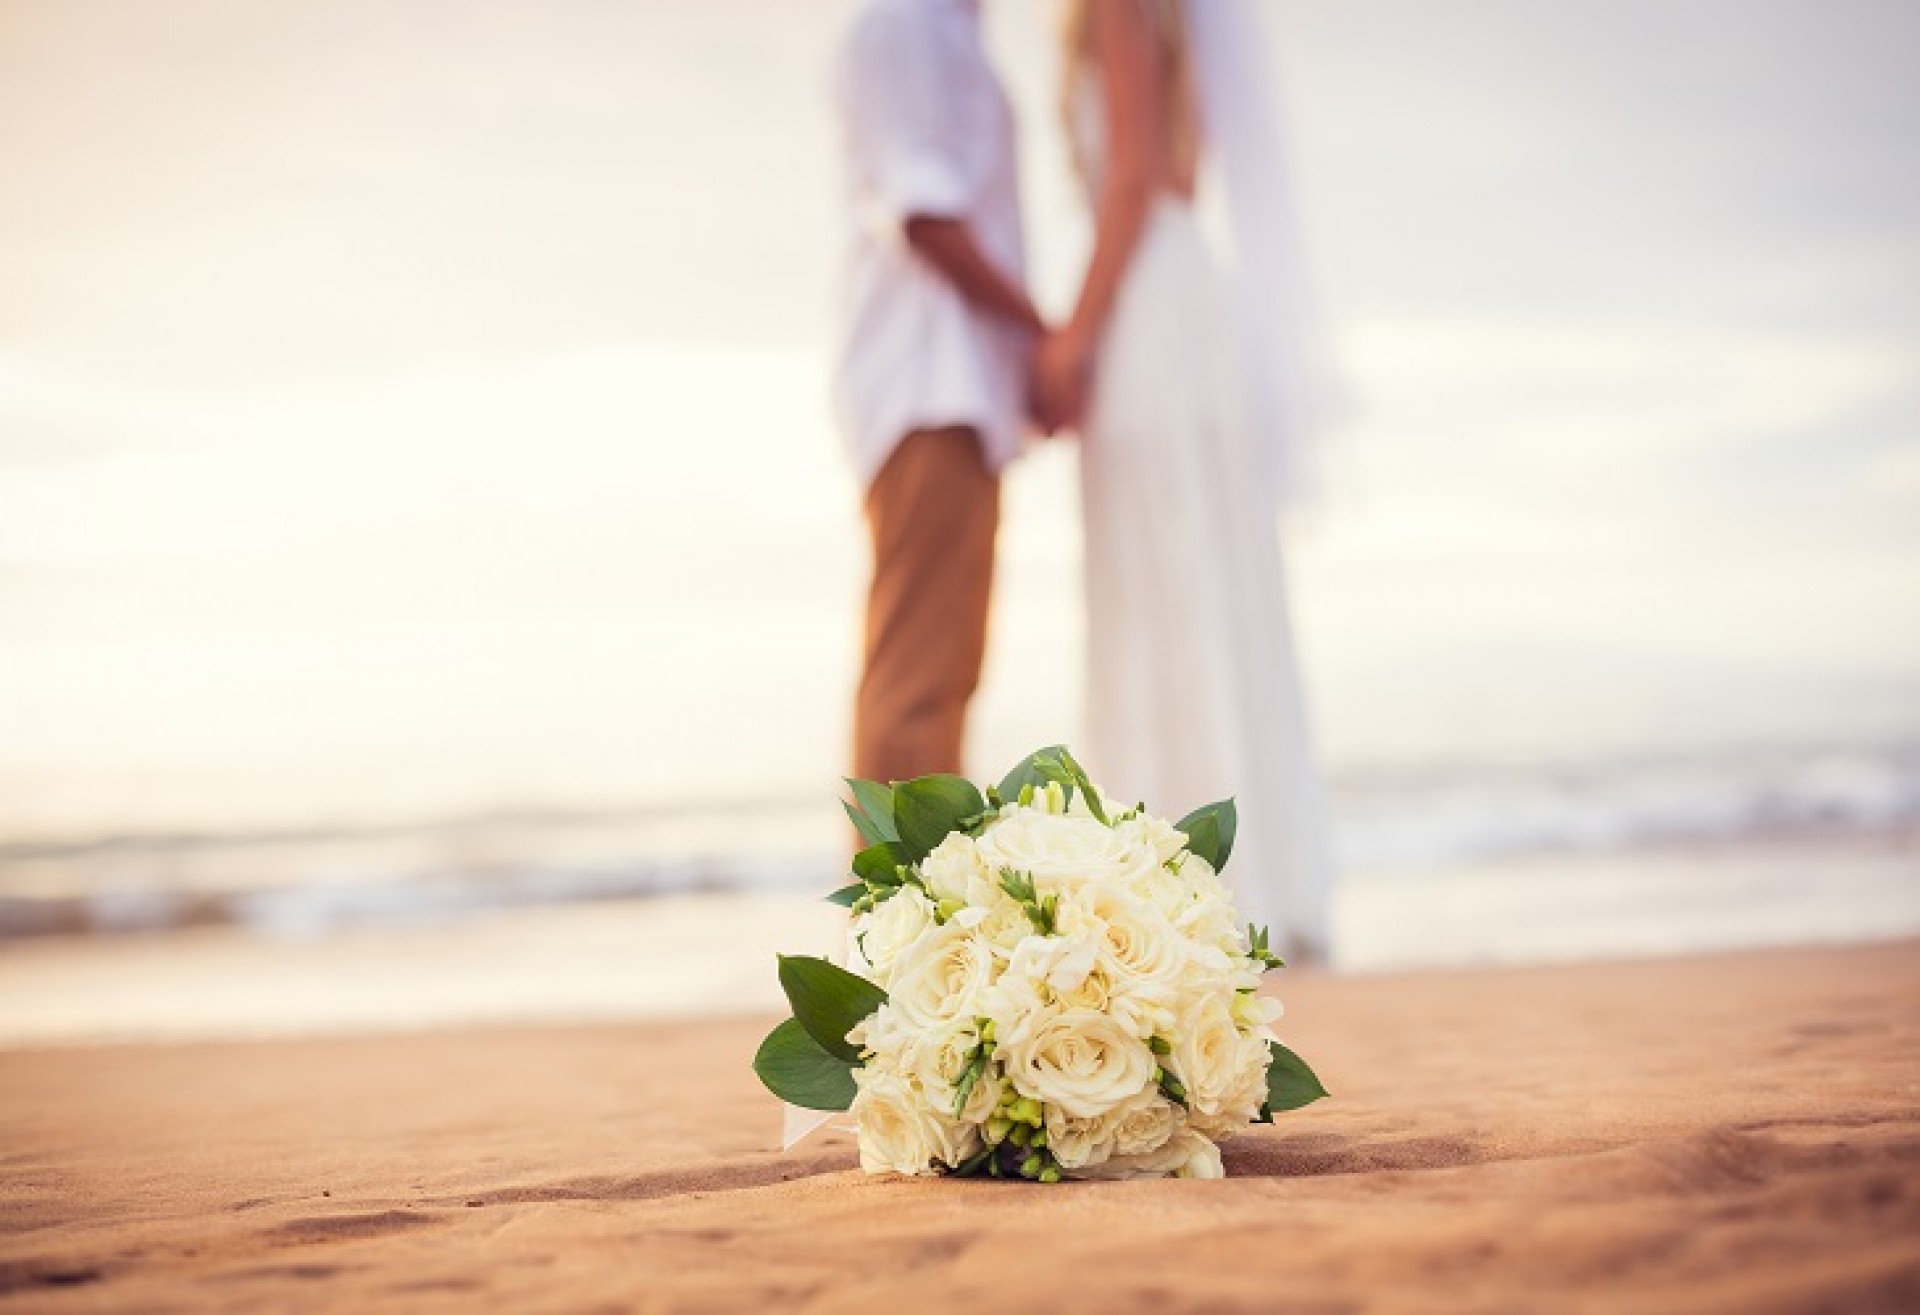 Weddings Abroad: Find your perfect destination